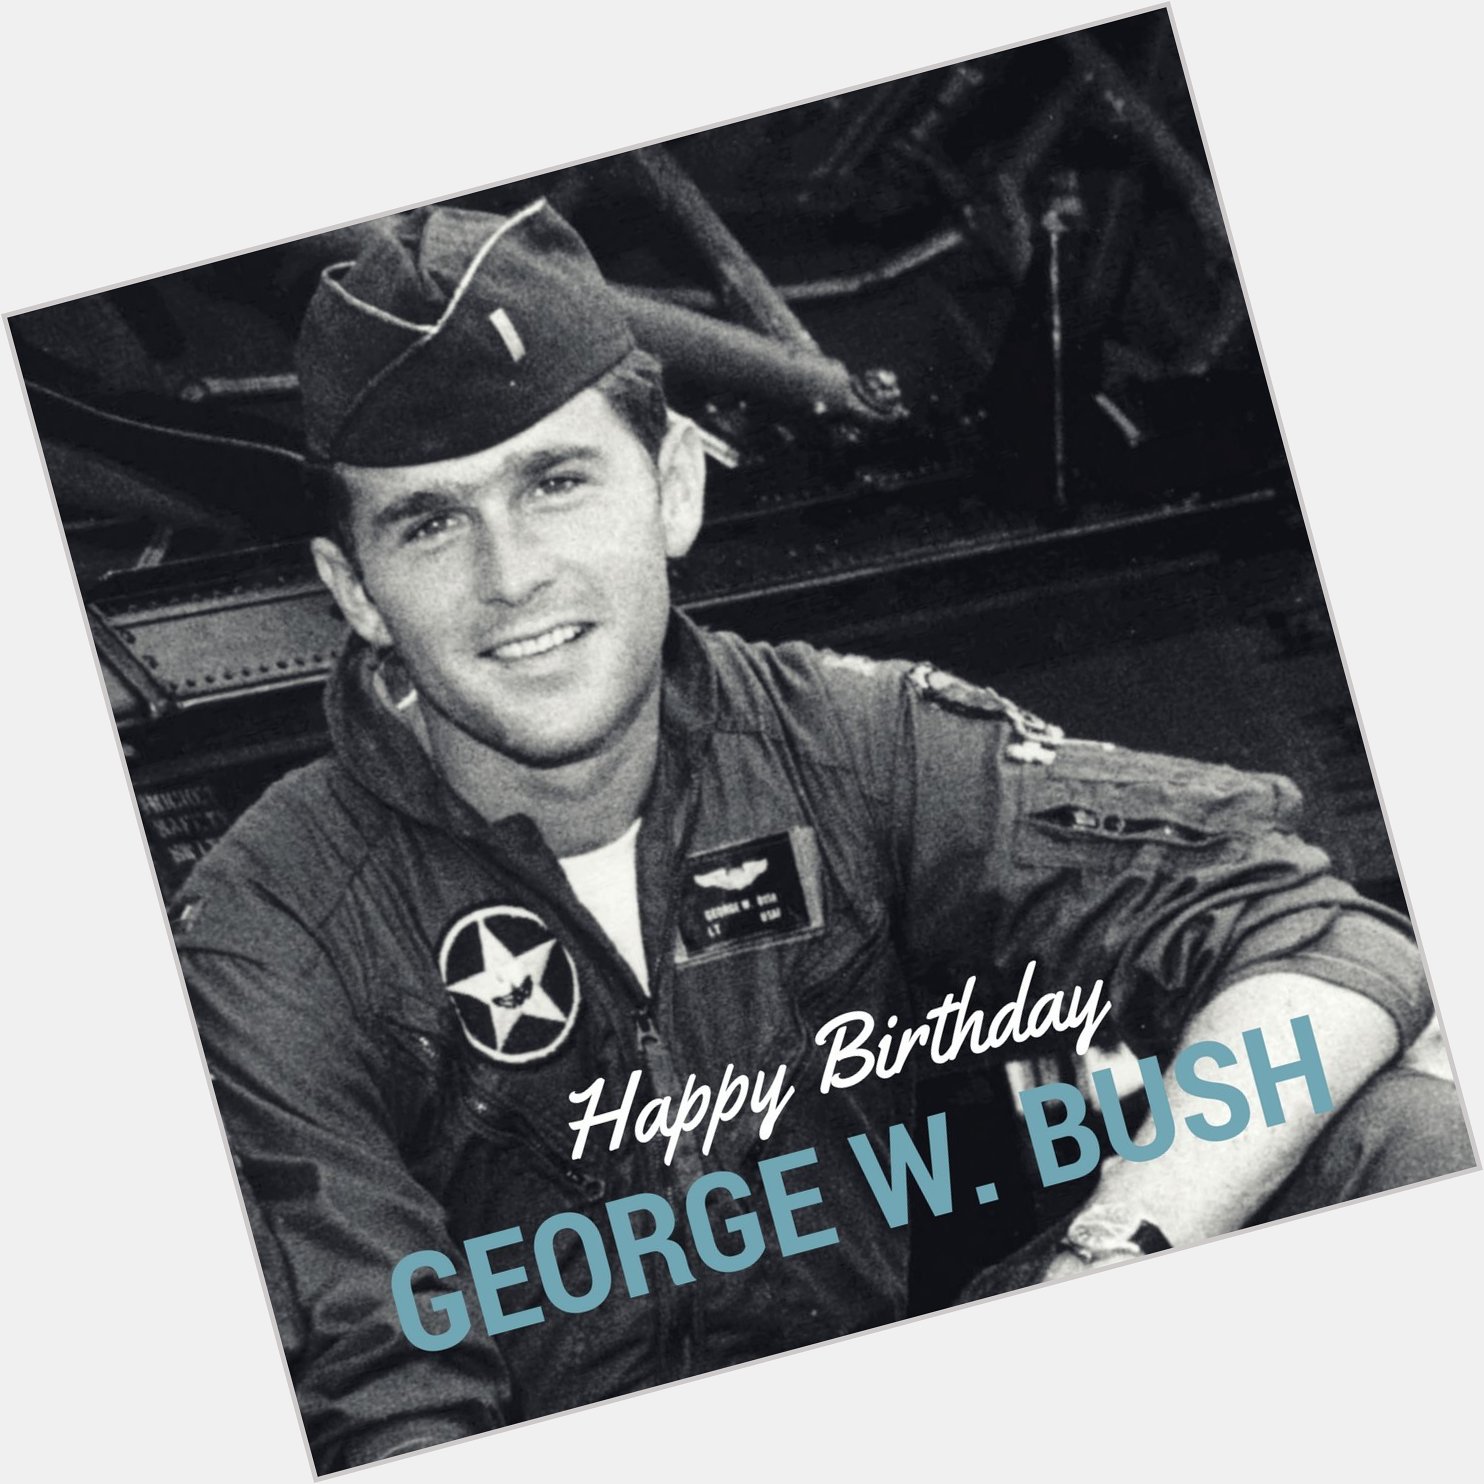 To wish former Texas Governor and President George W. Bush a Happy Birthday! 